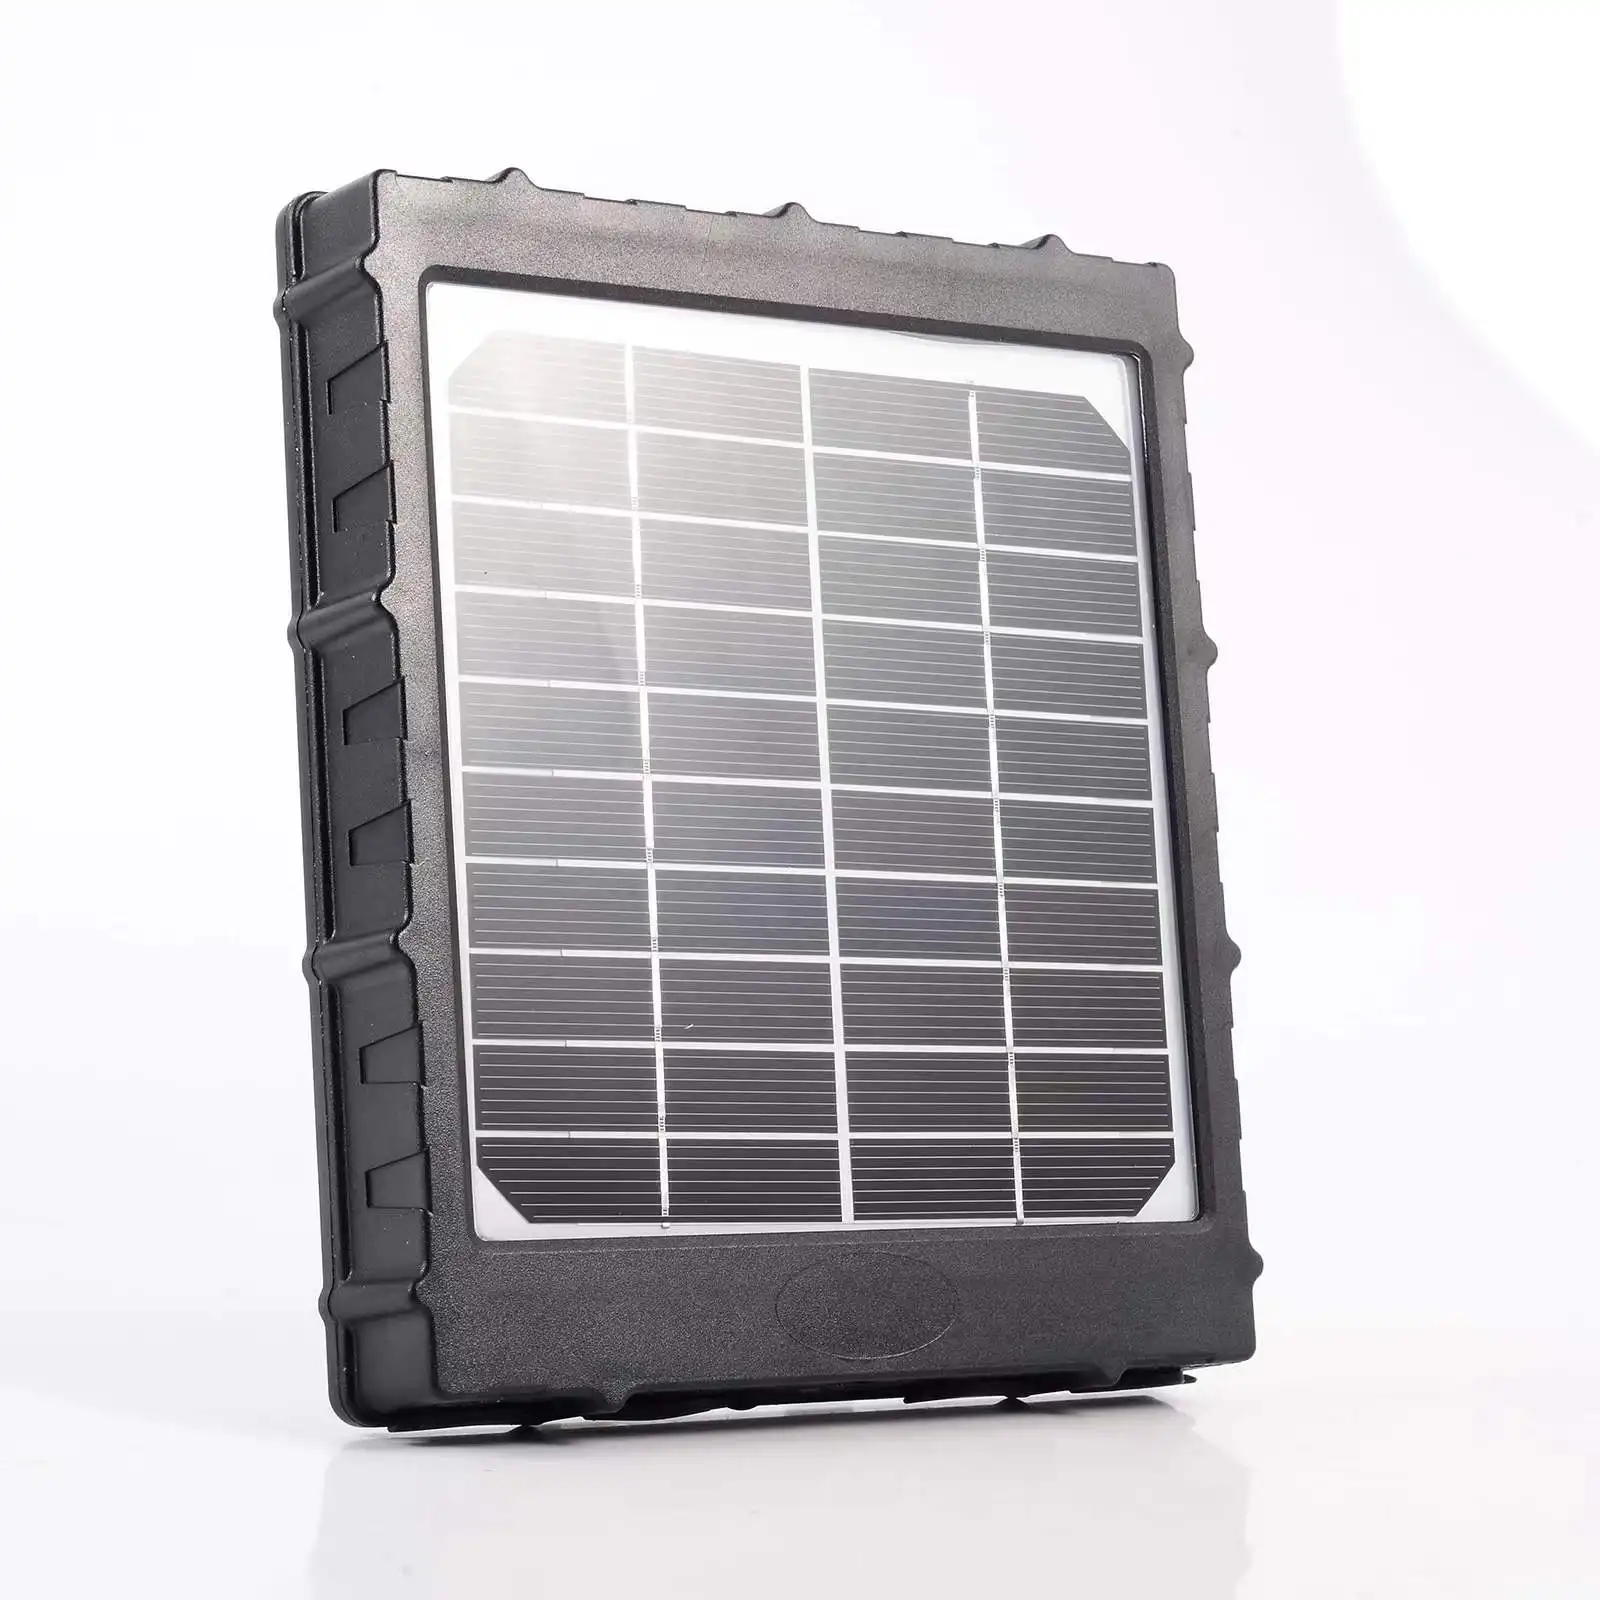 3W 8000mAh Solar Panels for Wildlife Hunting Cellular Game Trail Cameras Traps with 6/9/12V Output External Rechargeable Battery